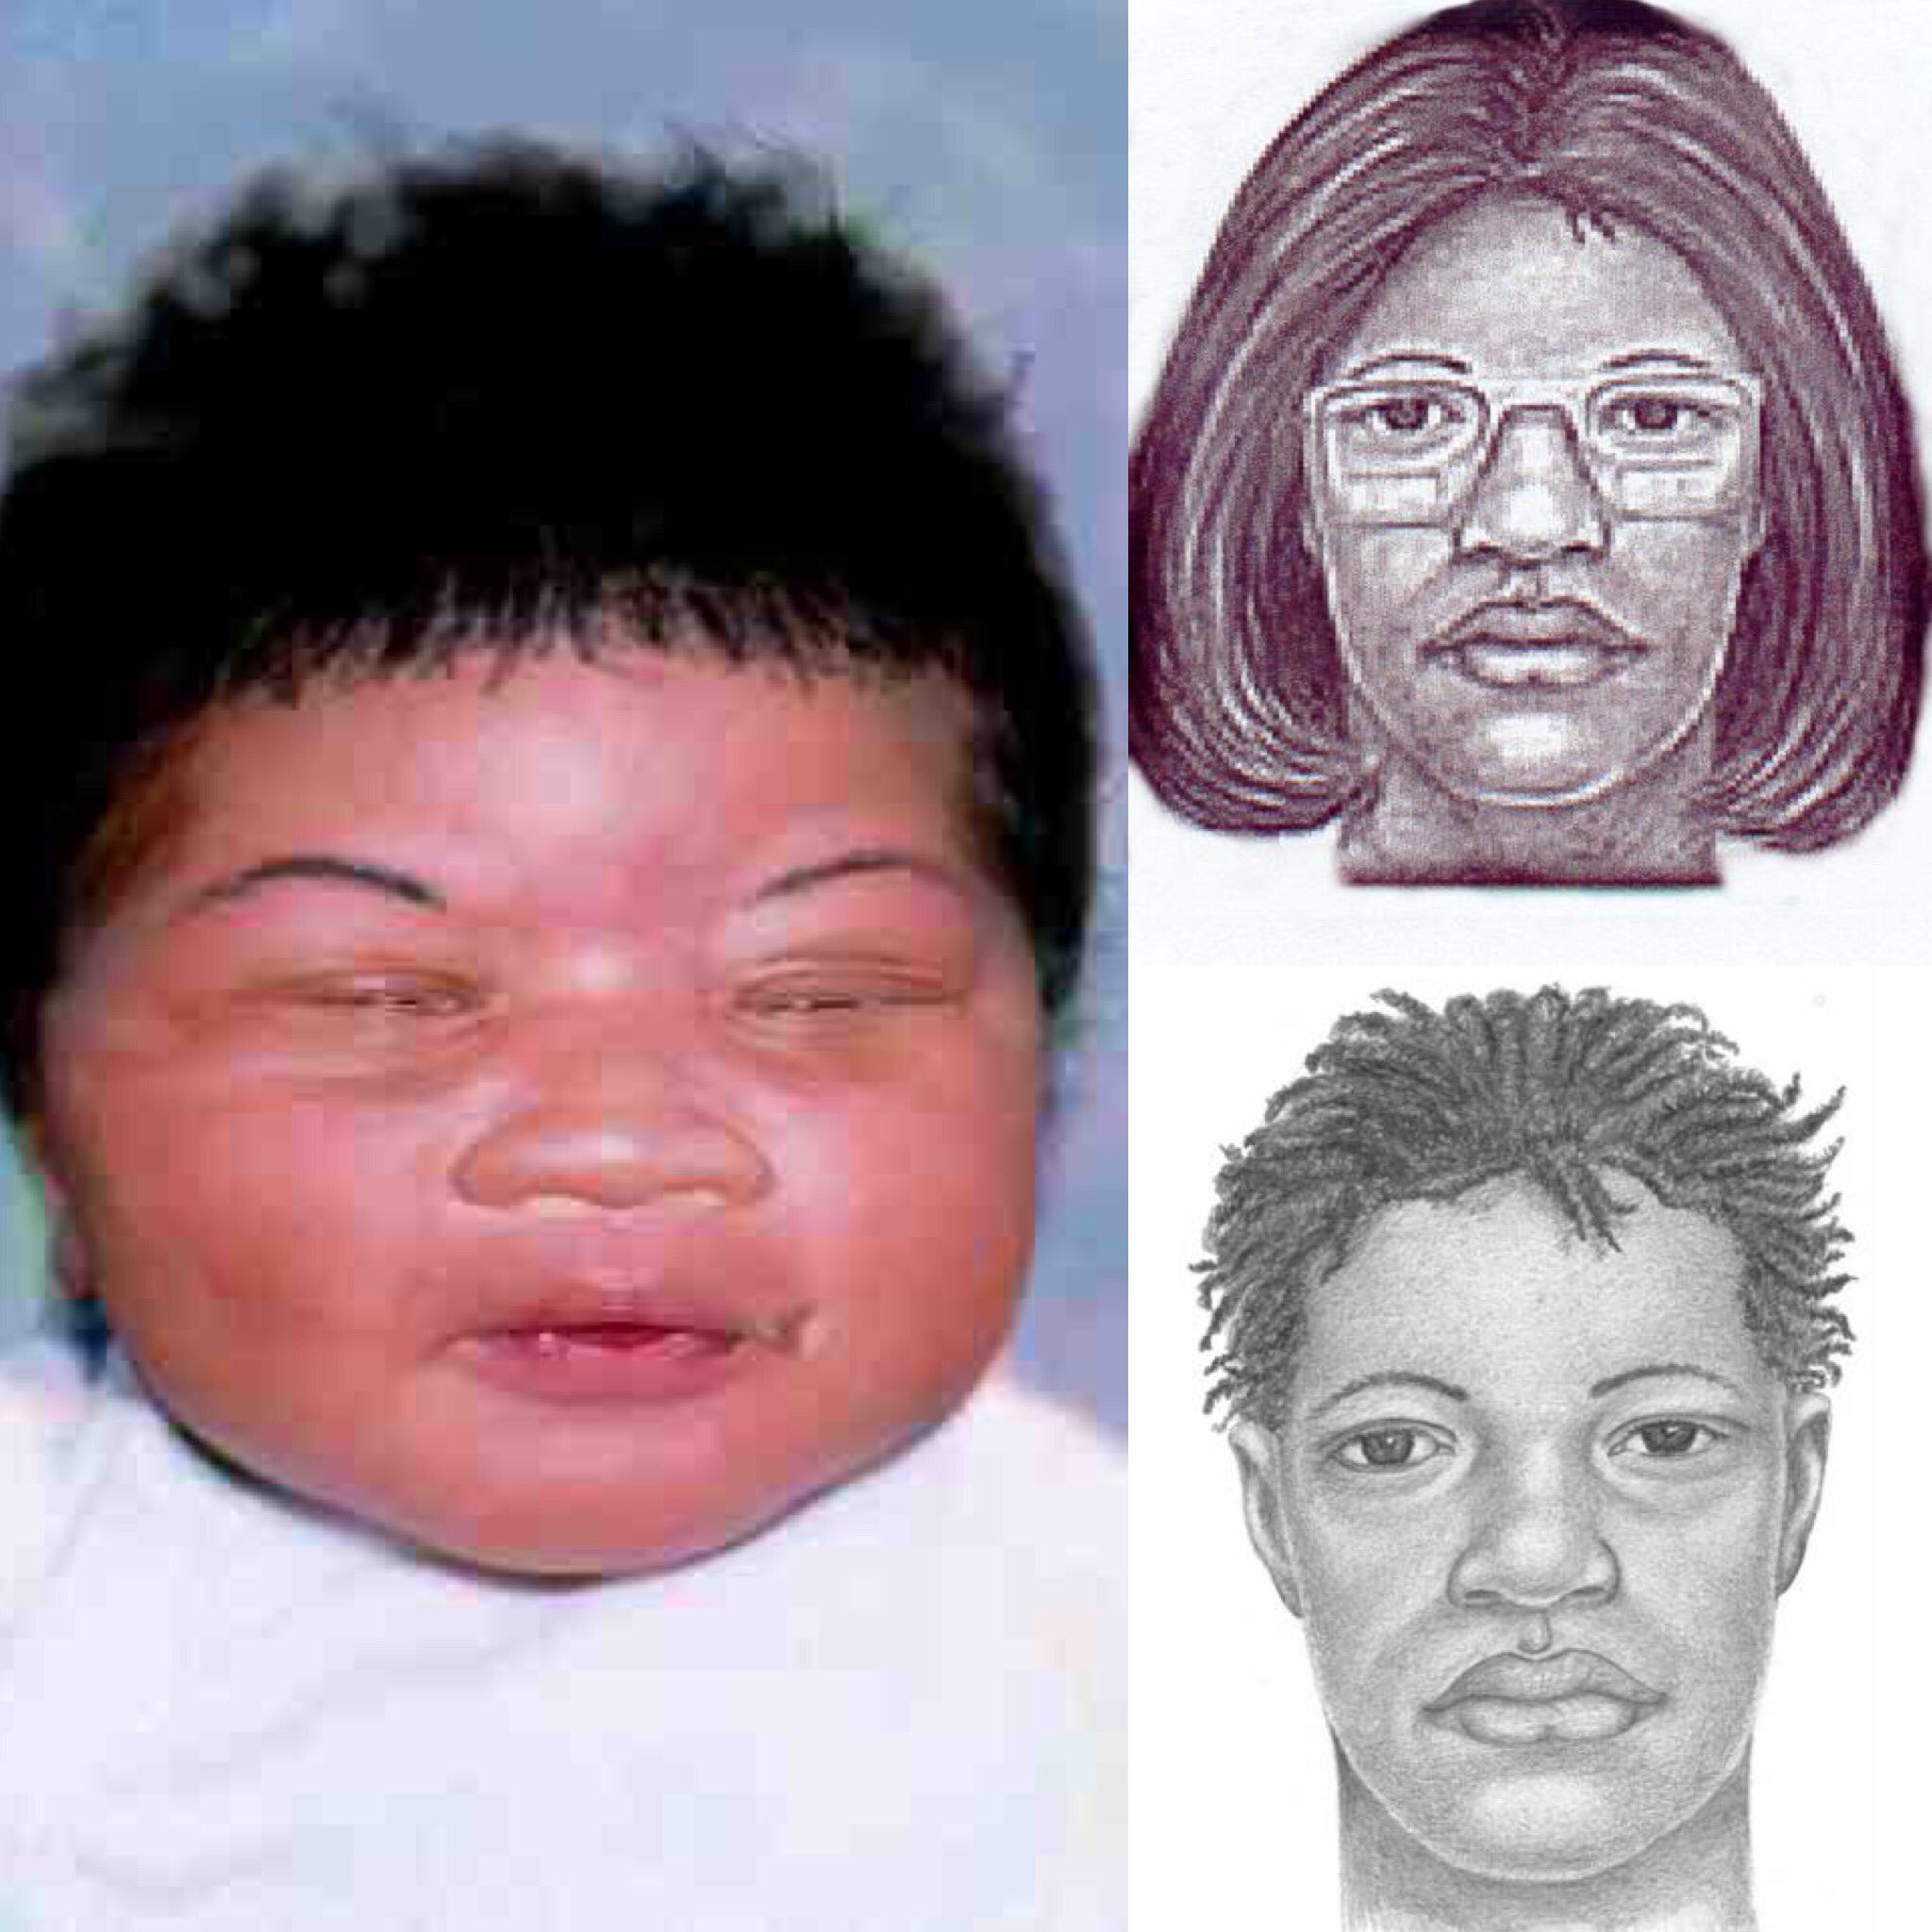 Jacksonville, FL Sheriff, Mike Williams, says a girl who was abducted as an infant has been found after some 18 years. Kamiyah Mobley was taken right after she was born from a Jacksonville hospital by a woman posing as a healthcare worker. Mobley was found in Walterboro, SC. Gloria Williams, 51, has been arrested for Mobley's abduction according to Sheriff Williams.